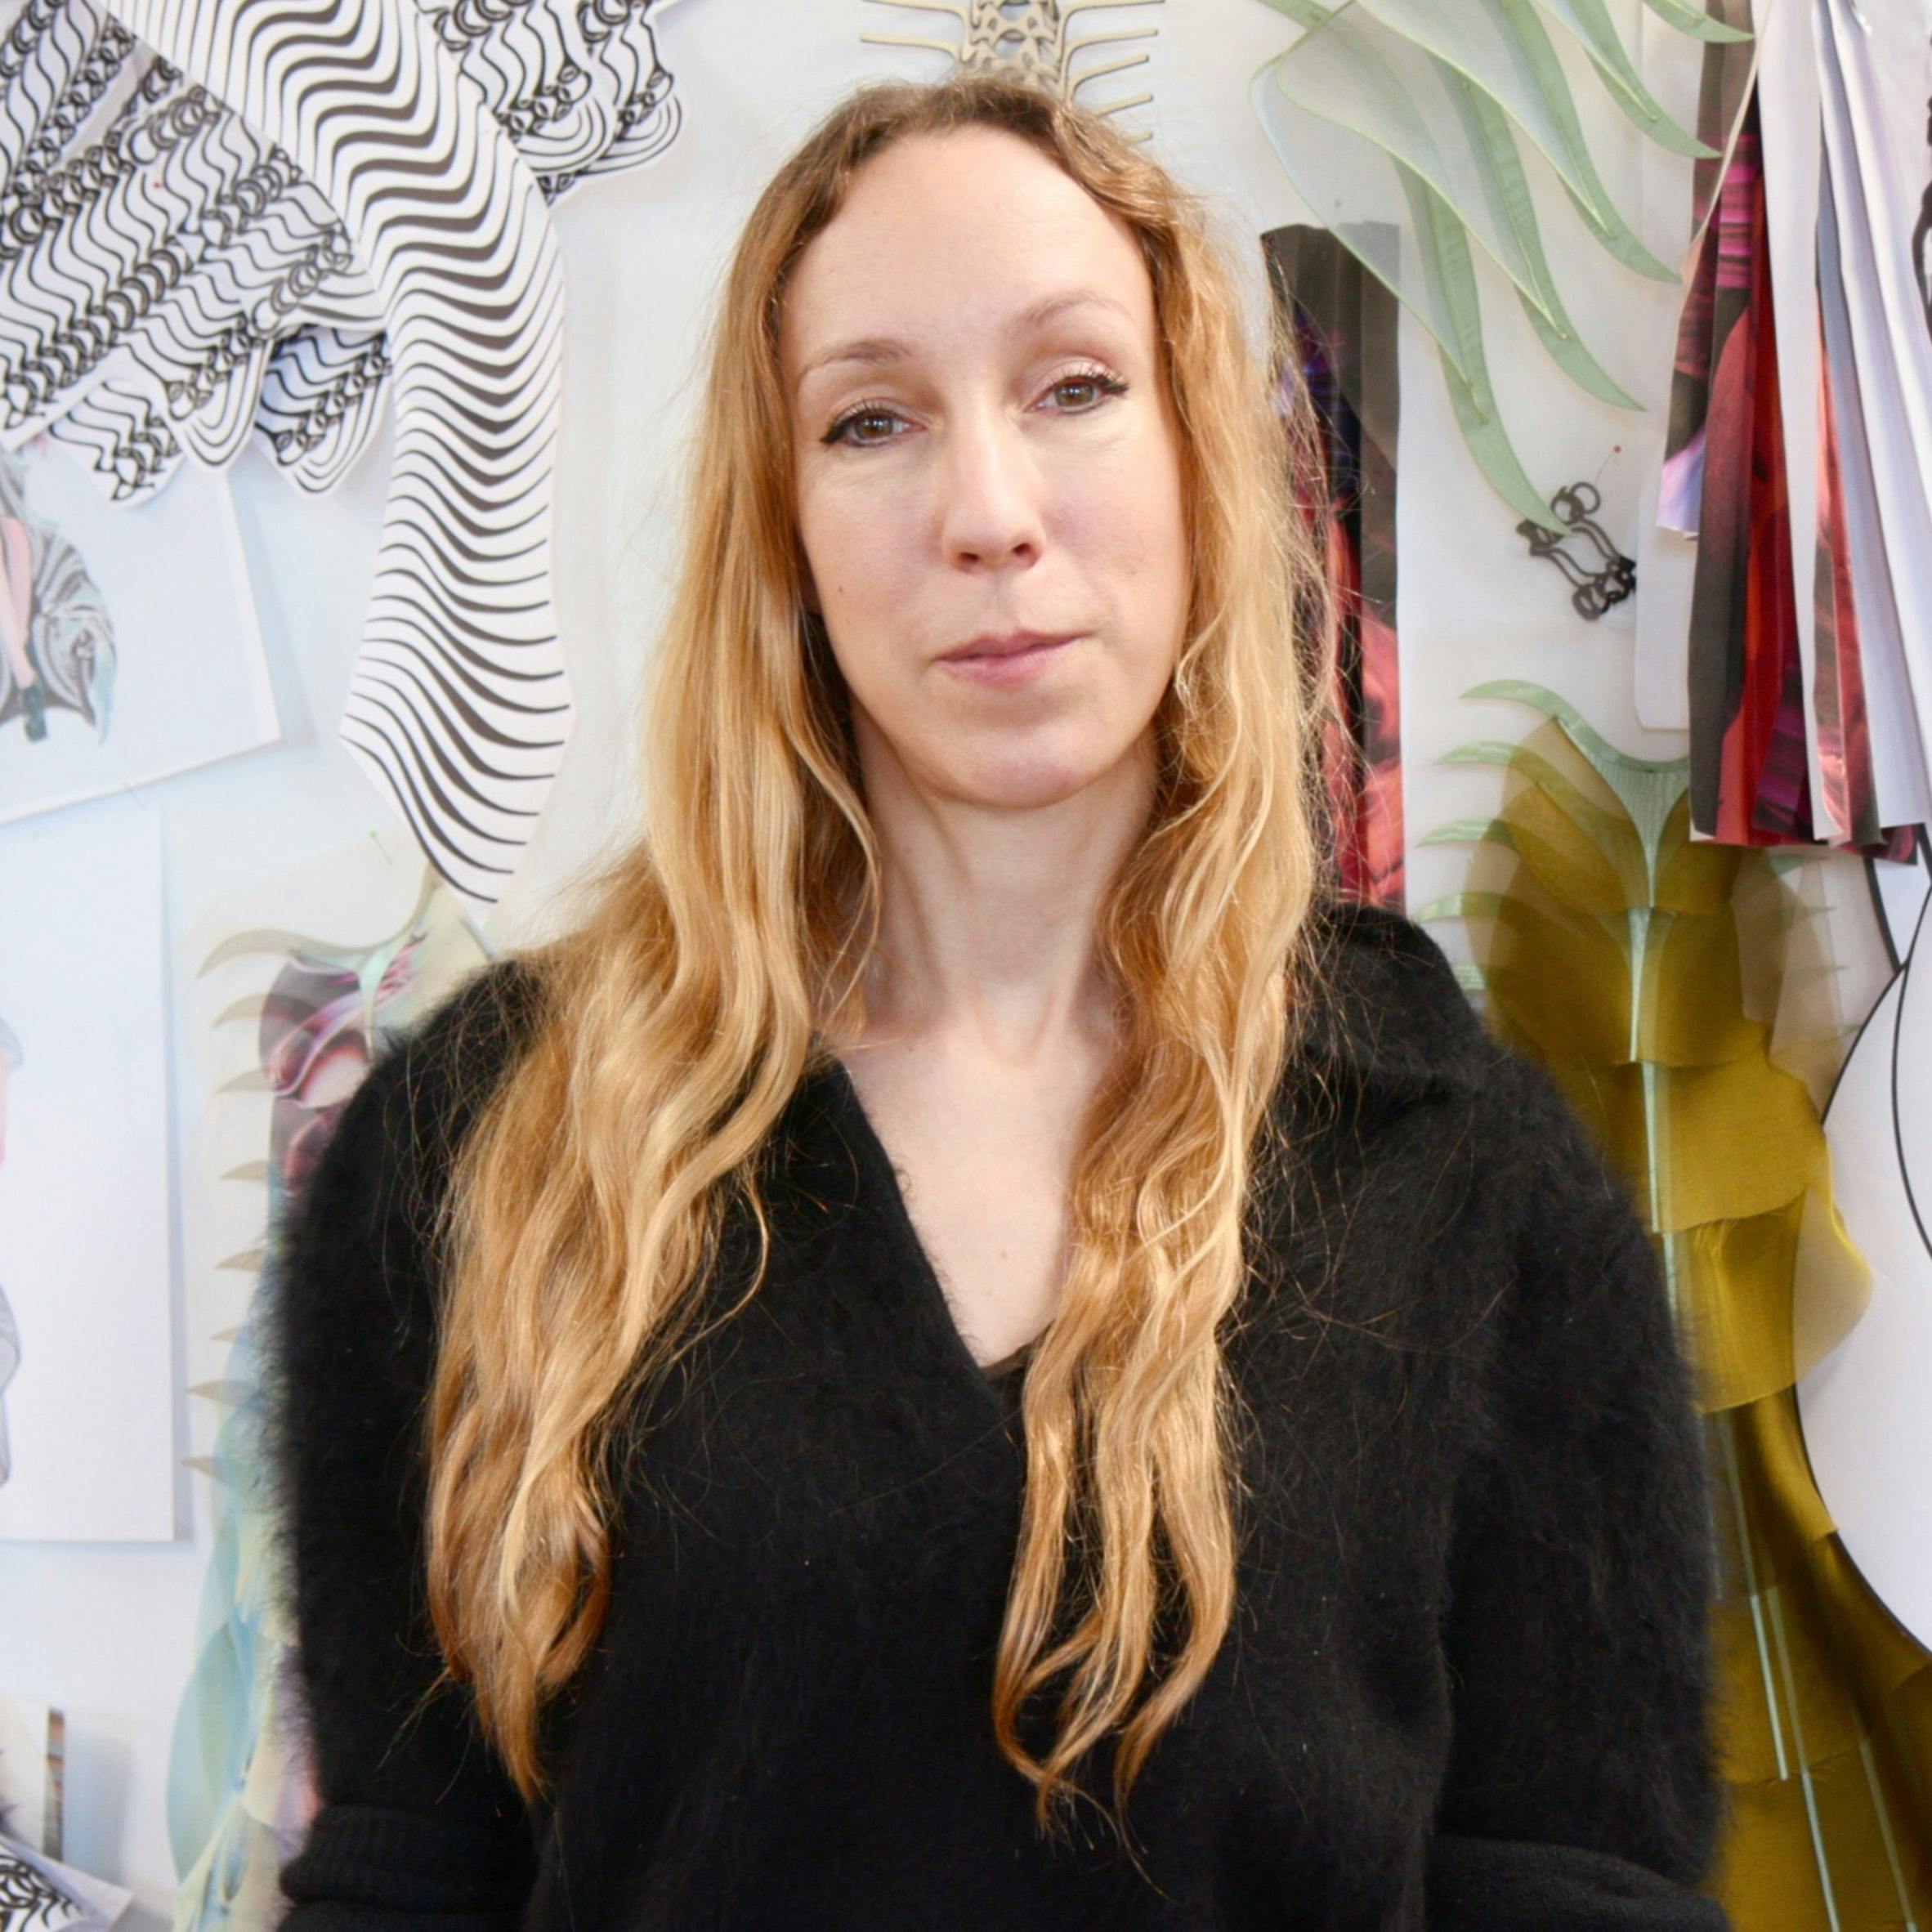 IRIS VAN HERPEN: ARCHITECTURAL KNOWLEDGE IS VITAL IN THE FASHION INDUSTRY